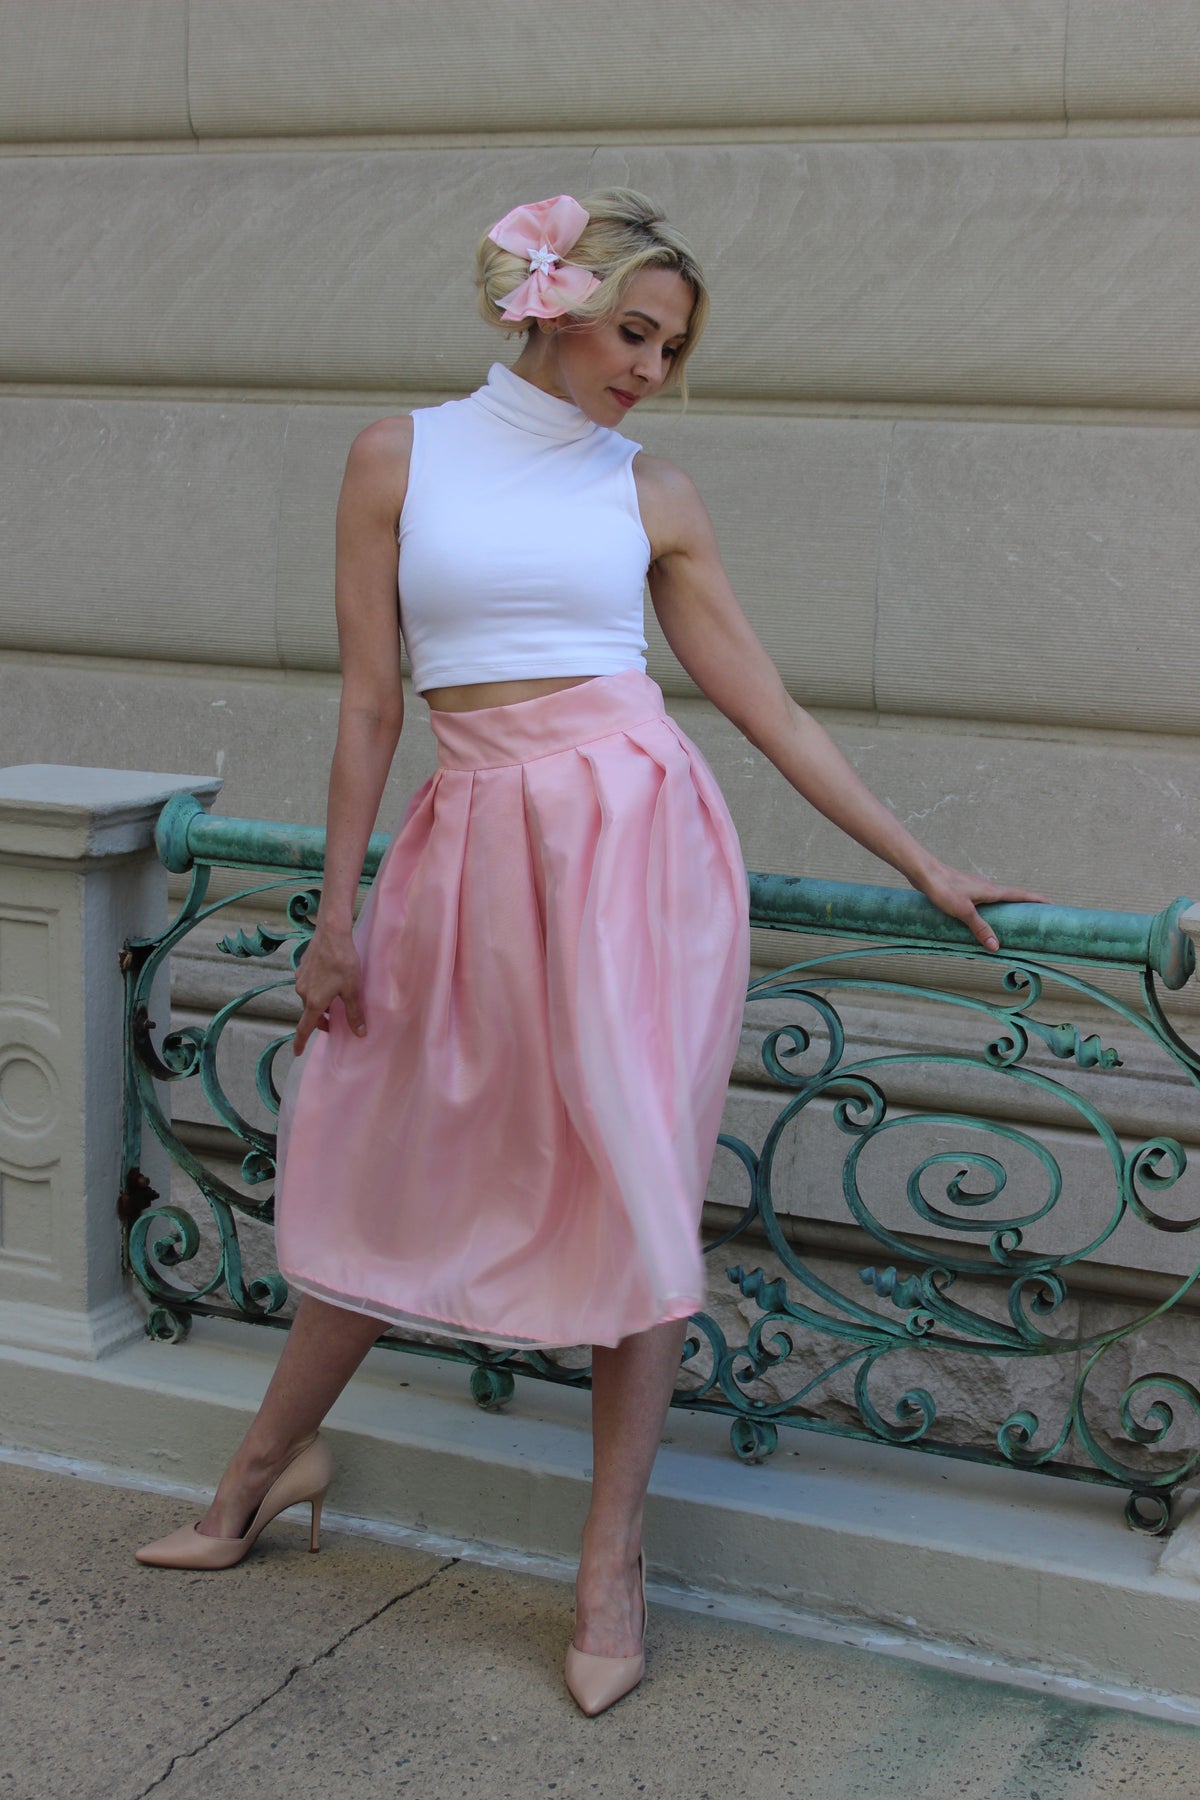 Model wearing a full satin and organza skirt atop a layer of tulle netting and a white turtleneck crop top and a pink bow in her hair.